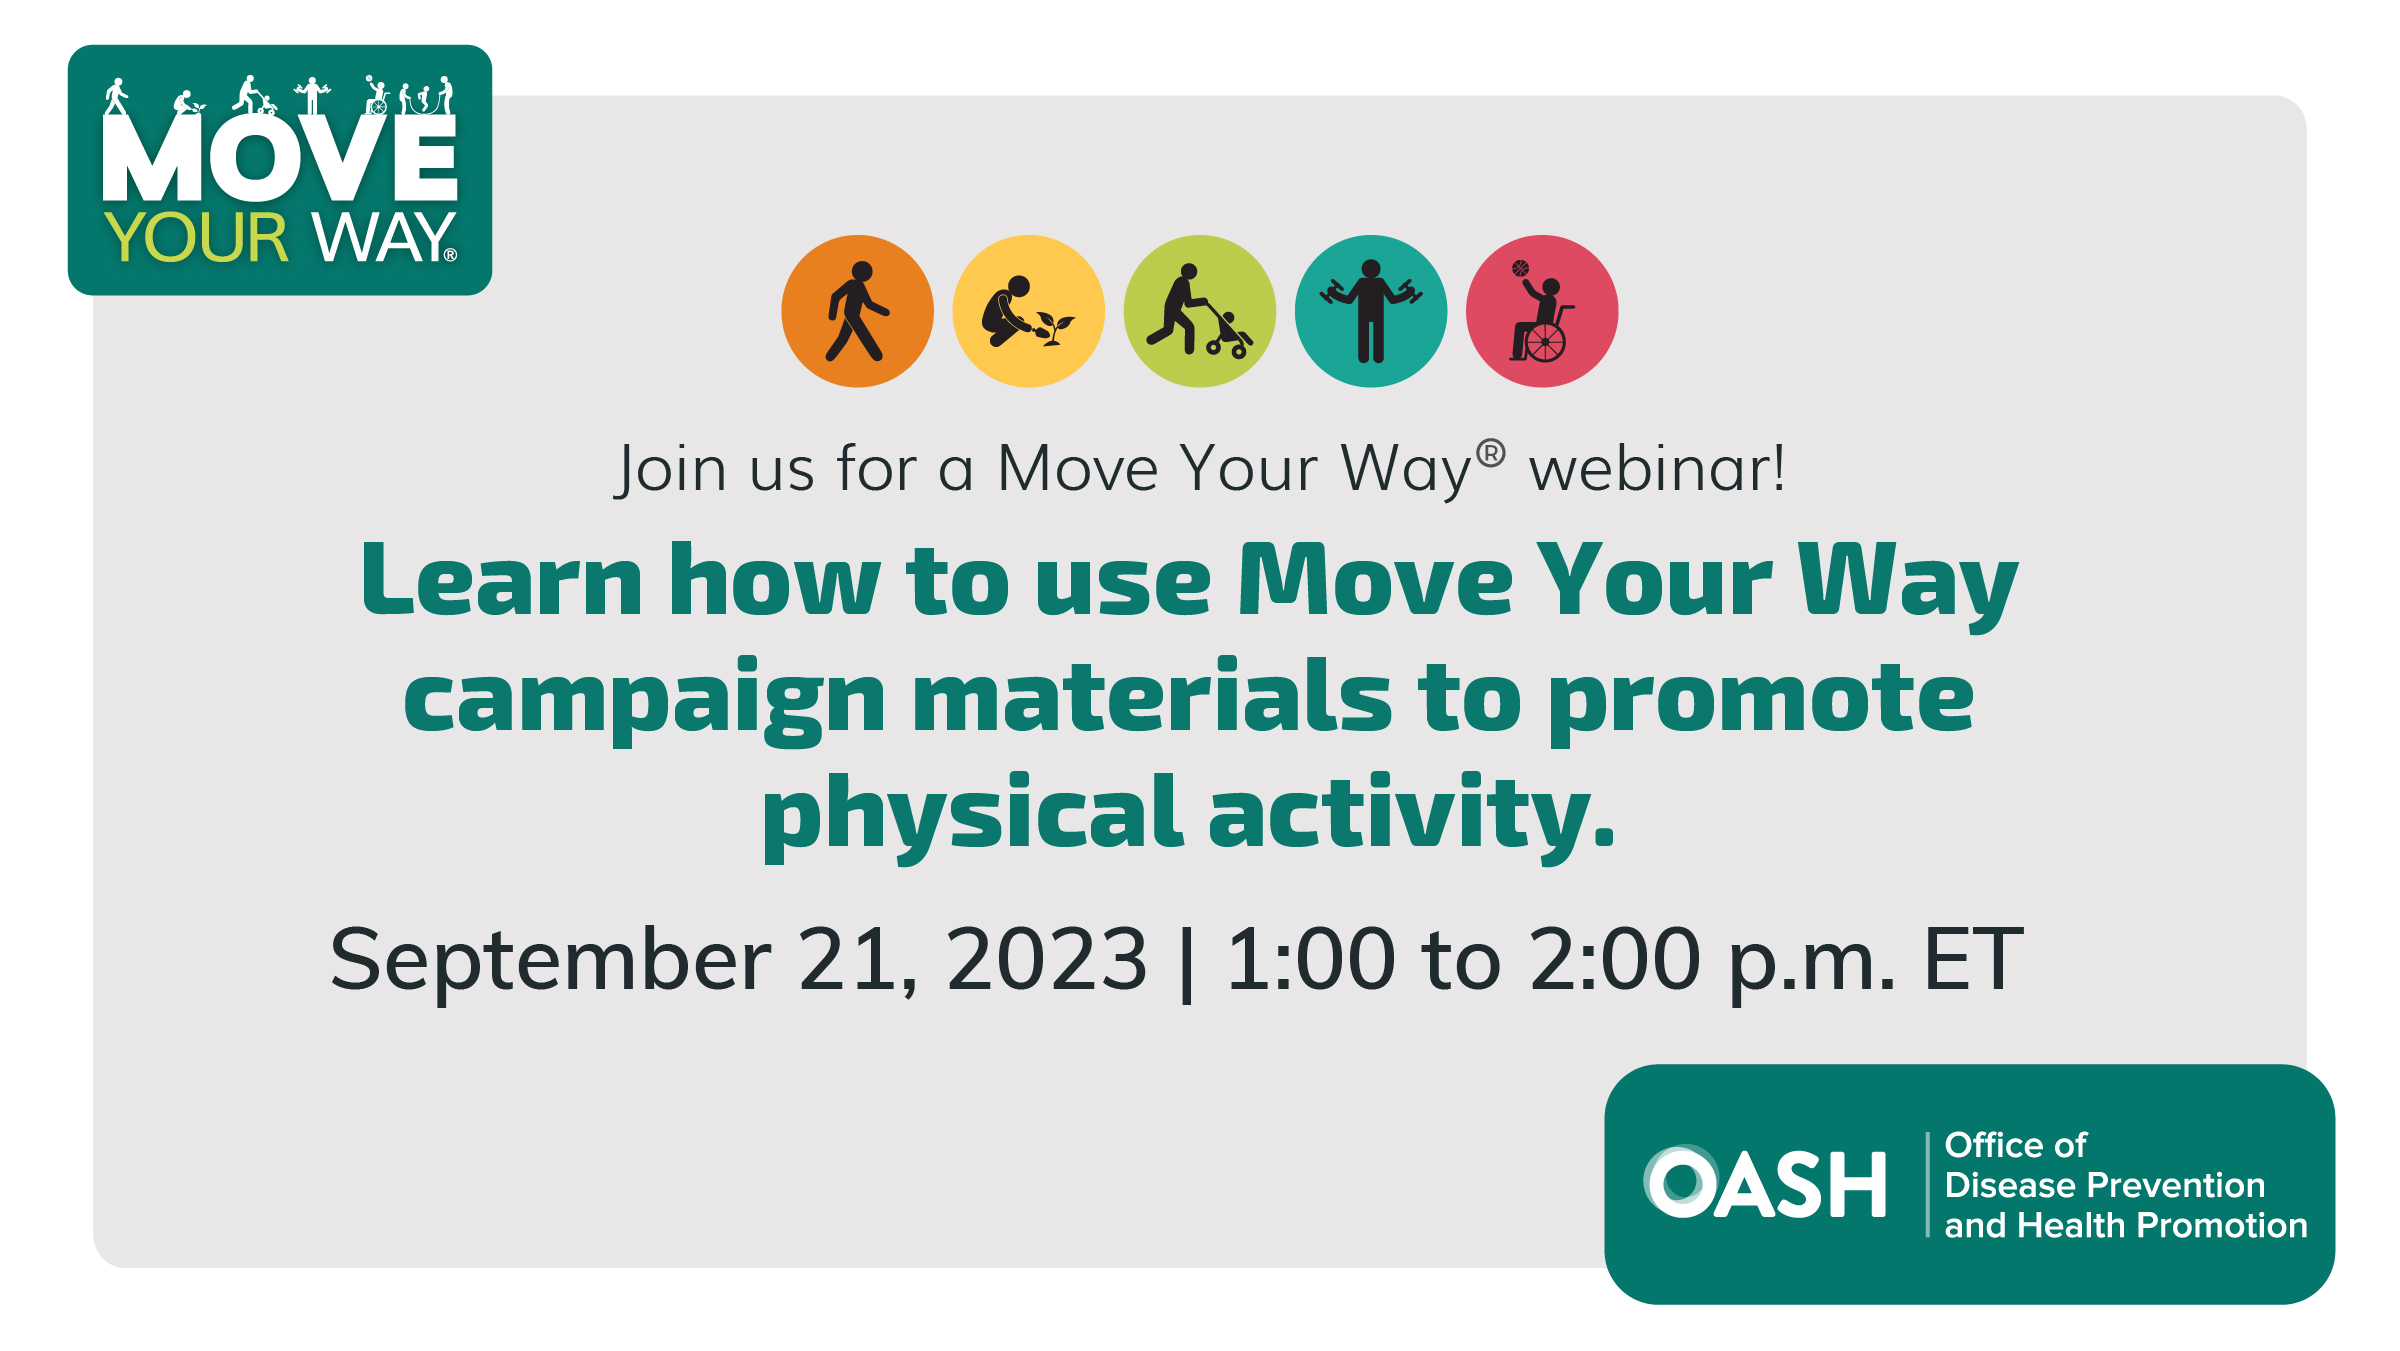 Move Your Way logo. Below the words are "Join us for a Move Your Way webinar! Learn how to use Move Your Way campaign materials to promote physical activity. September 21,2023. 1 to 2 p.m. ET".